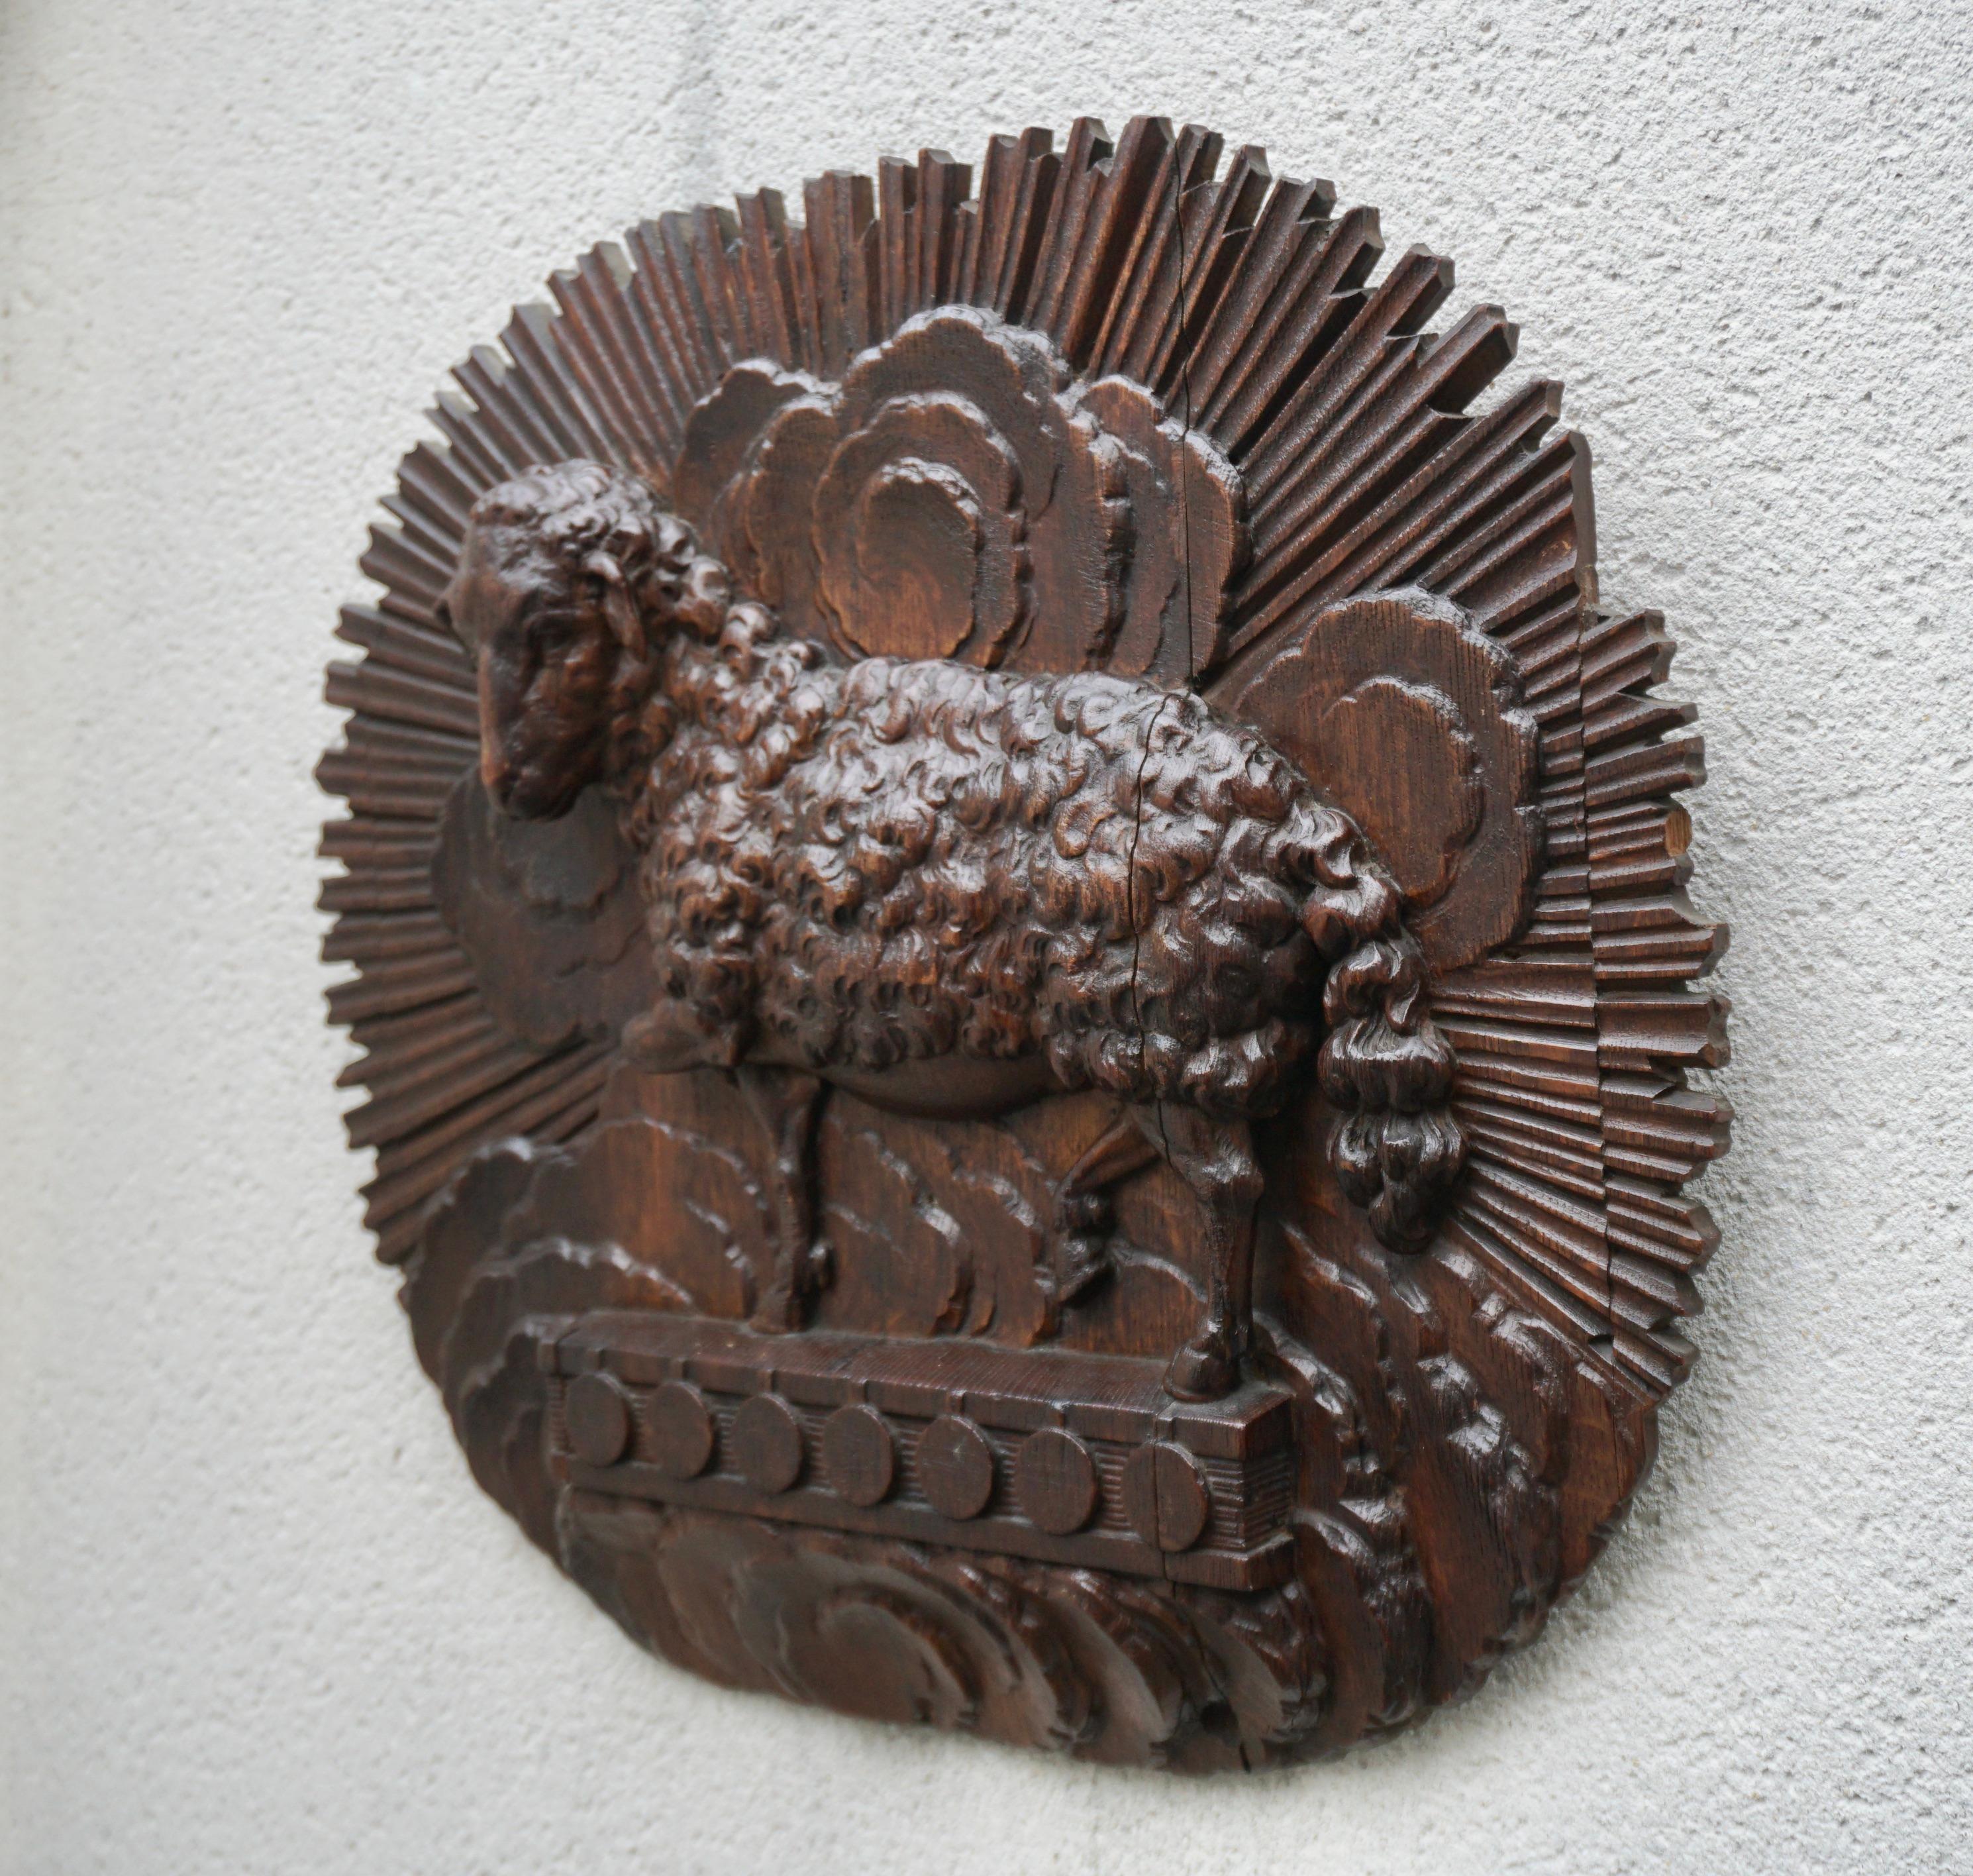 An antique hand-carved wooden relief of a sheep.

This wood carving is the work of a very skilled and inventive artist. The piece bears witness to his exceptional talent. The realism of the scene is emphasised by the amount of details depicted. The